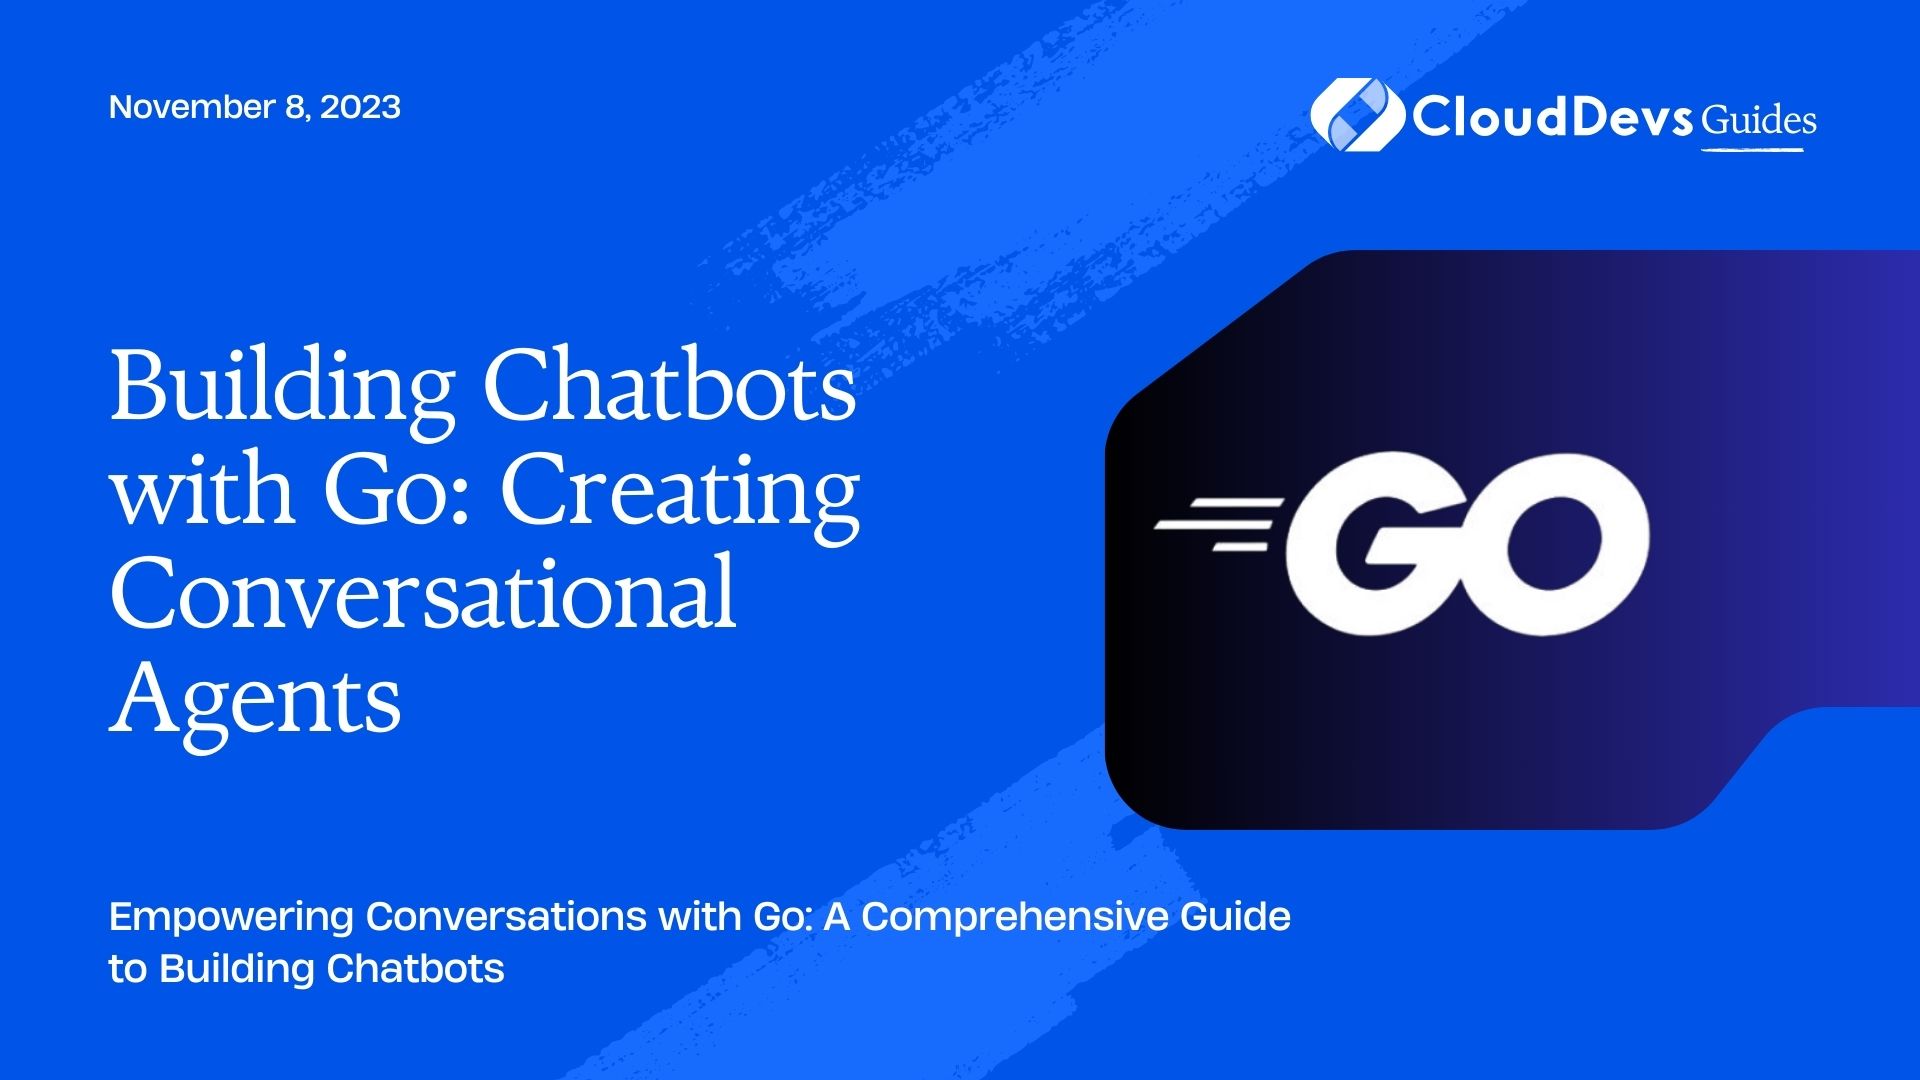 Building Chatbots with Go: Creating Conversational Agents